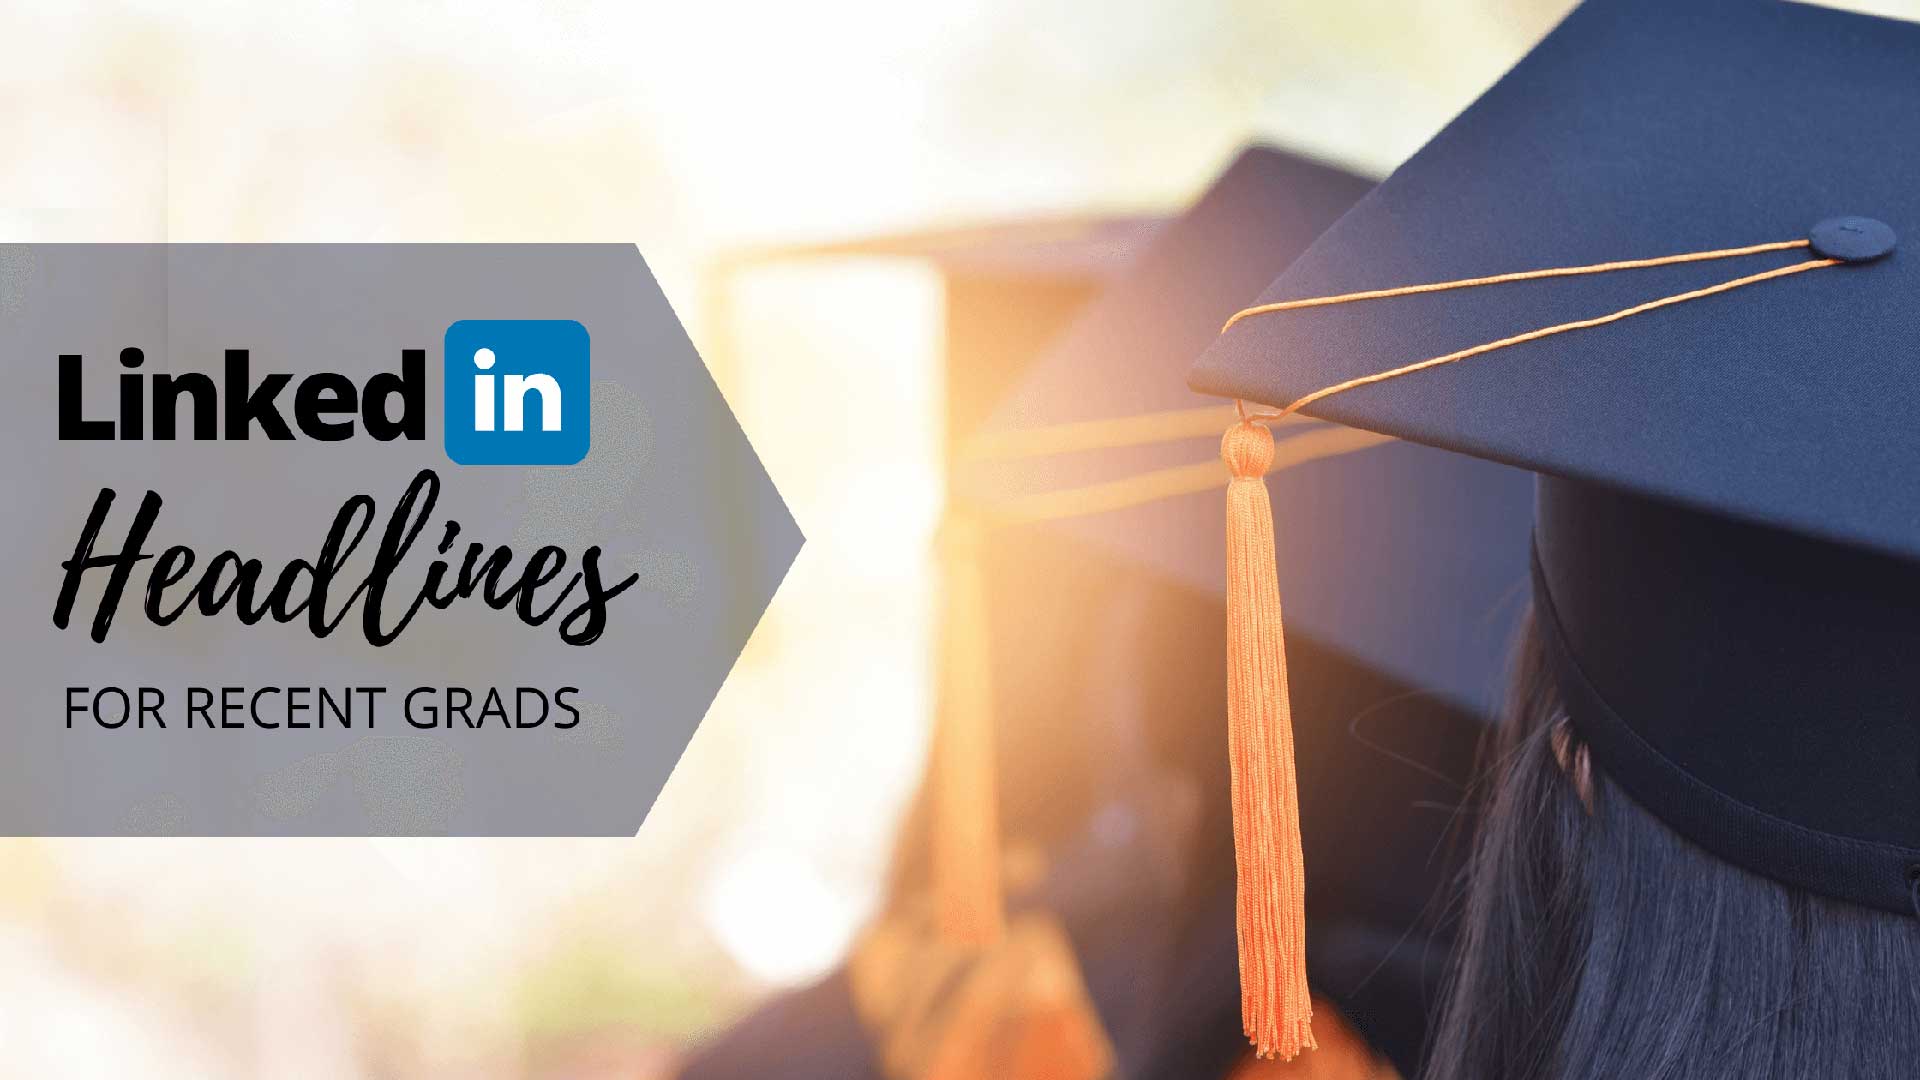 You are currently viewing LinkedIn Headline for Recent Graduates